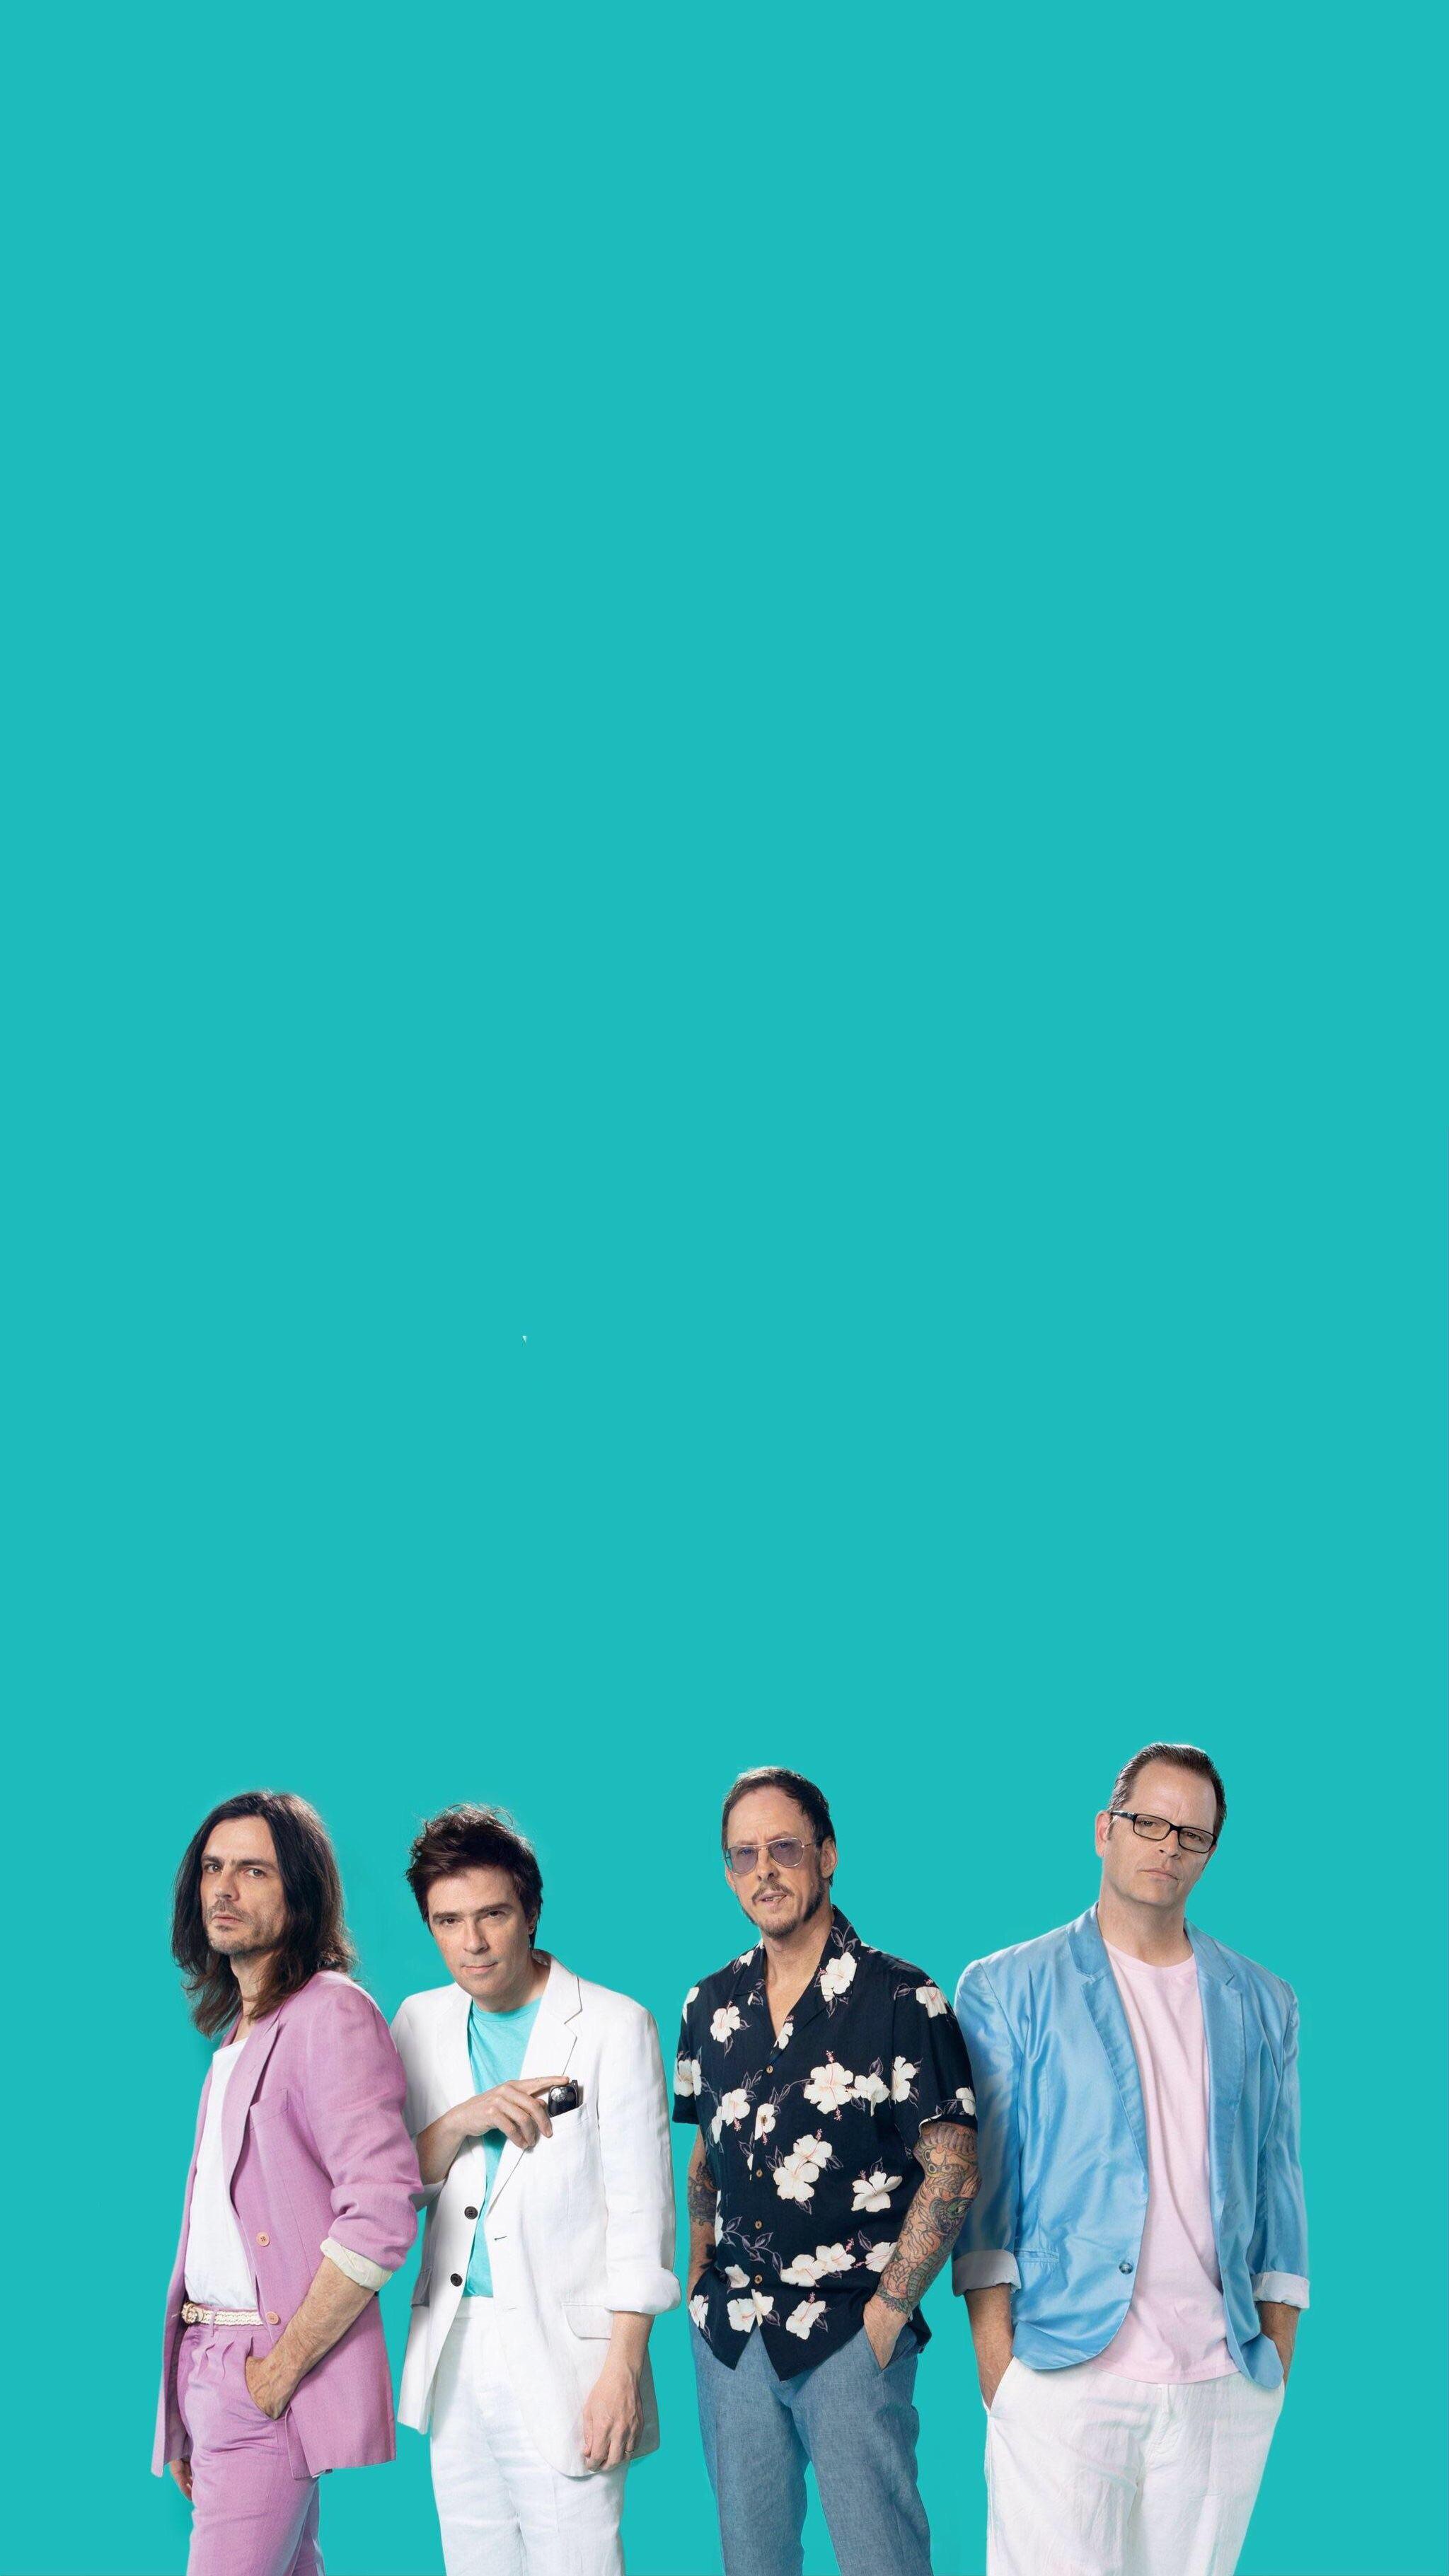 Quick Teal Album Wallpaper For Y All Another One Ing In Like A